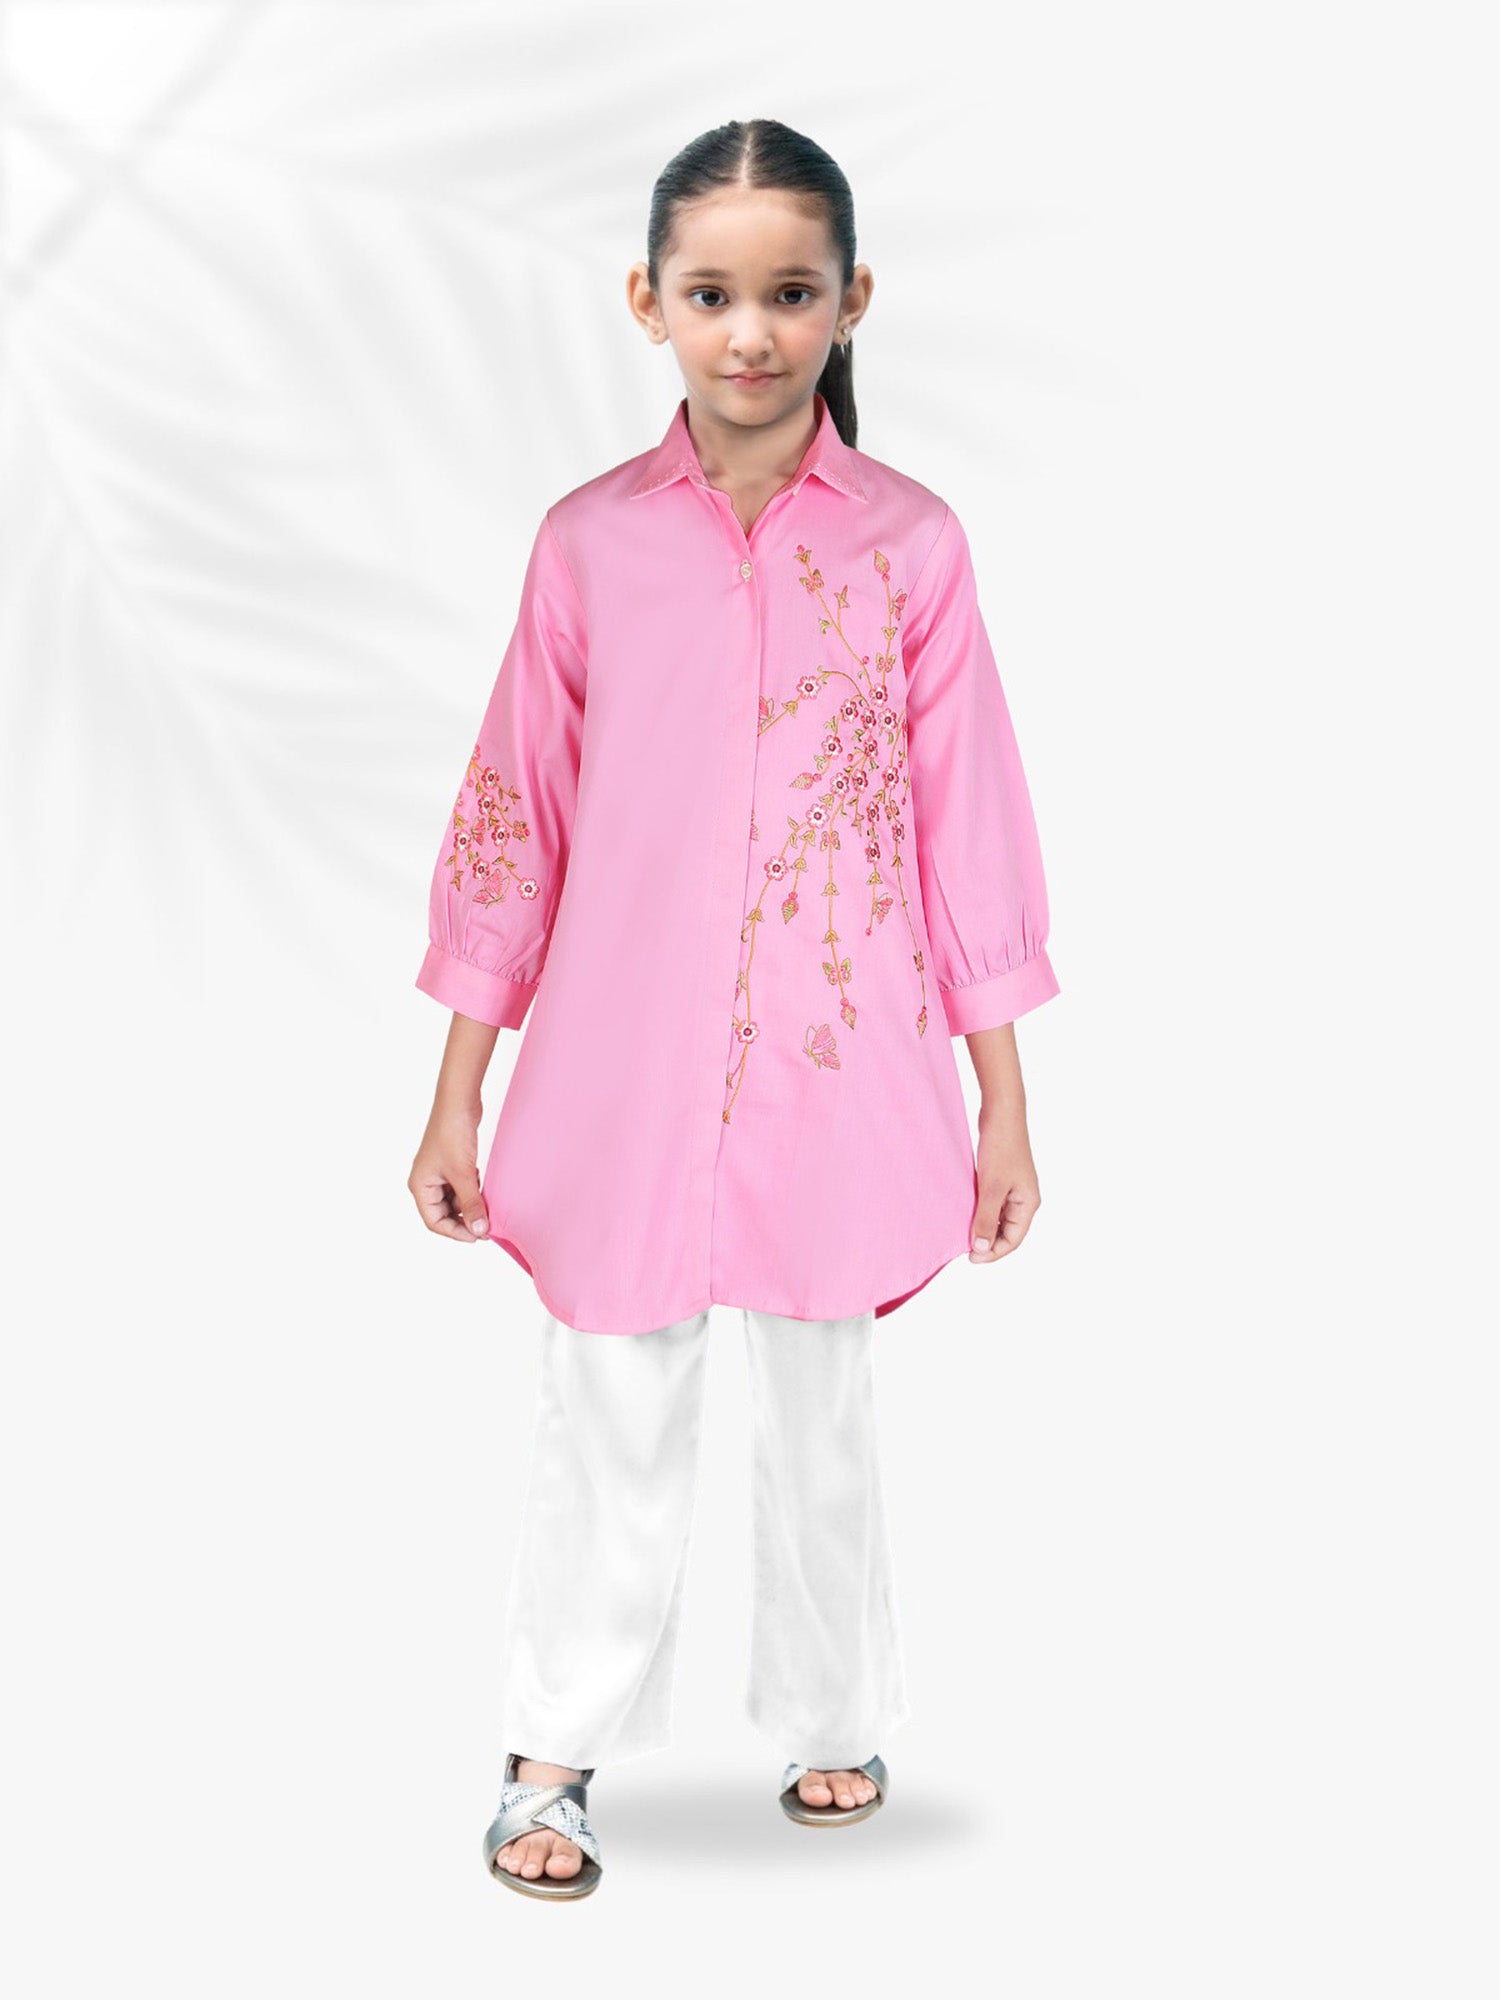 Buy Girls Ethnic Wear Online, Indian Traditional Dress for Baby Girl USA:  Party